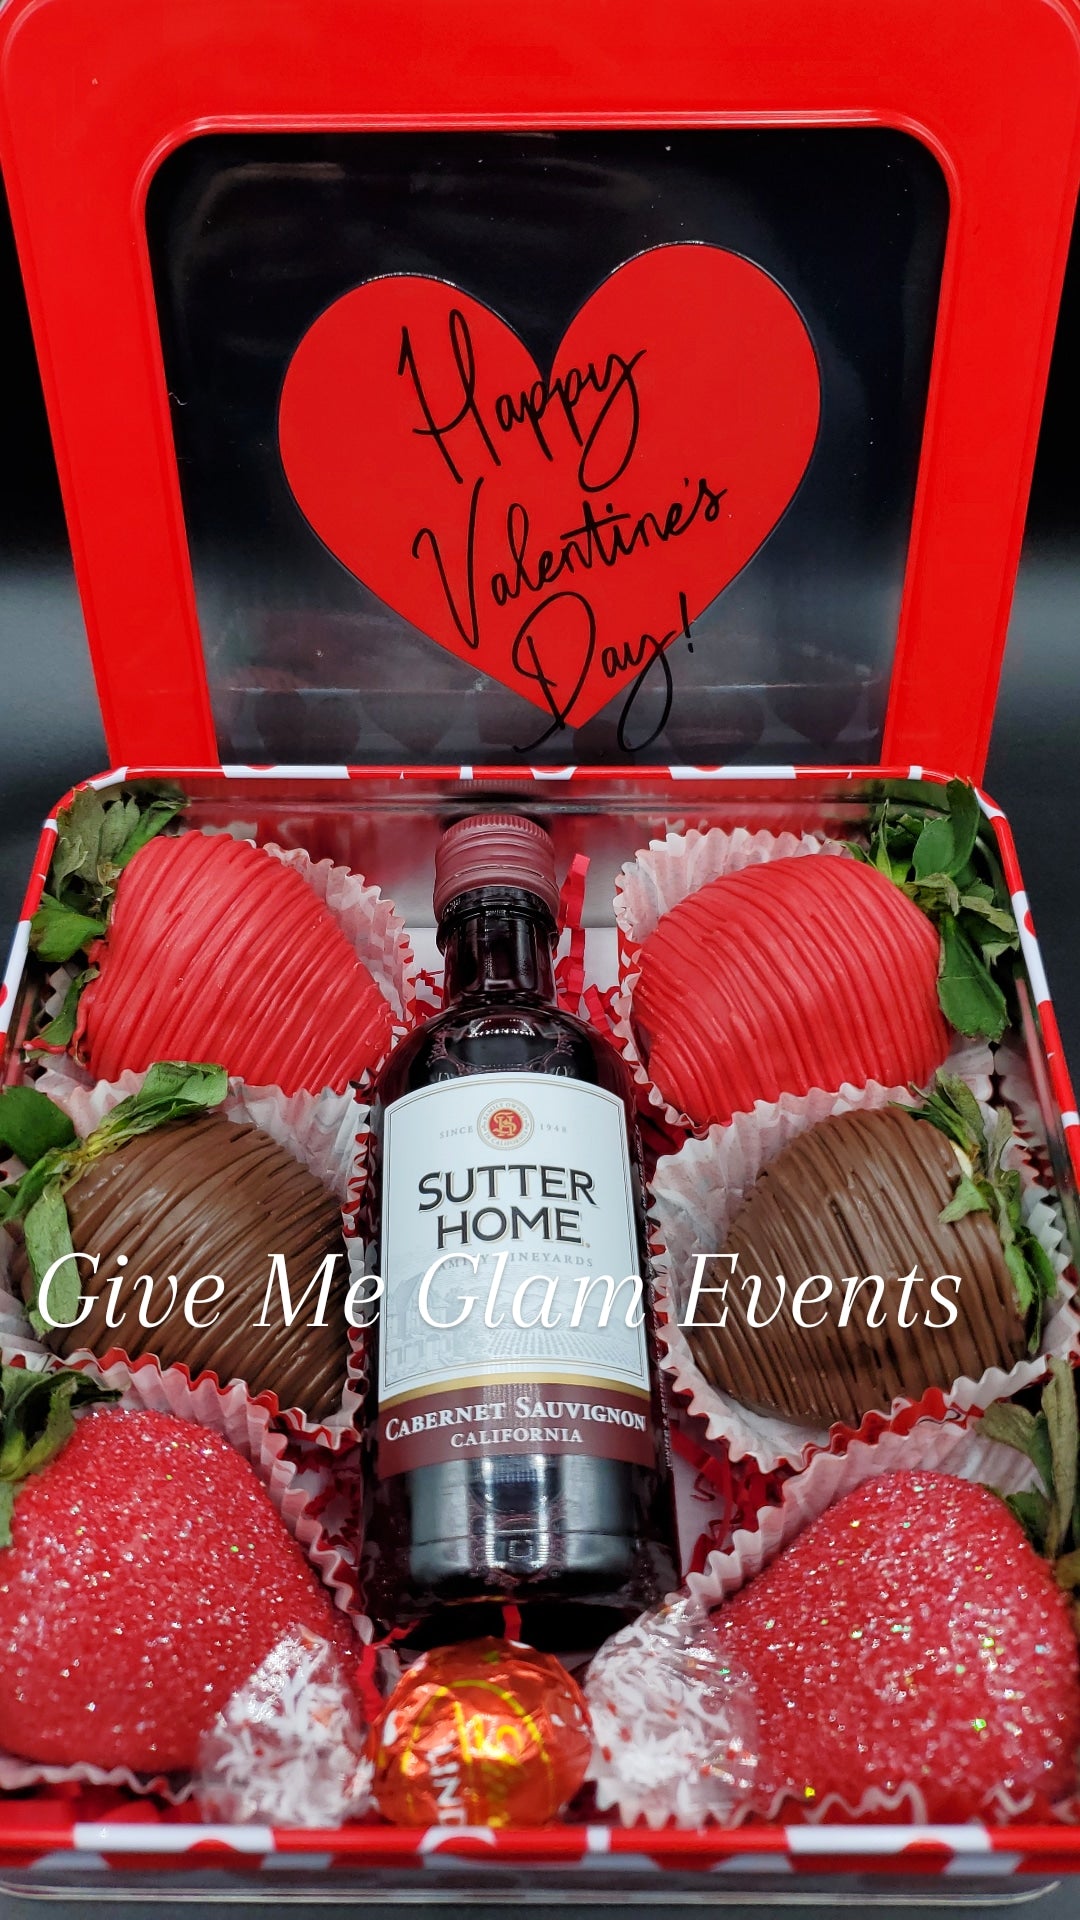 Chocolate-Covered Strawberries – Bliss in a Bottle